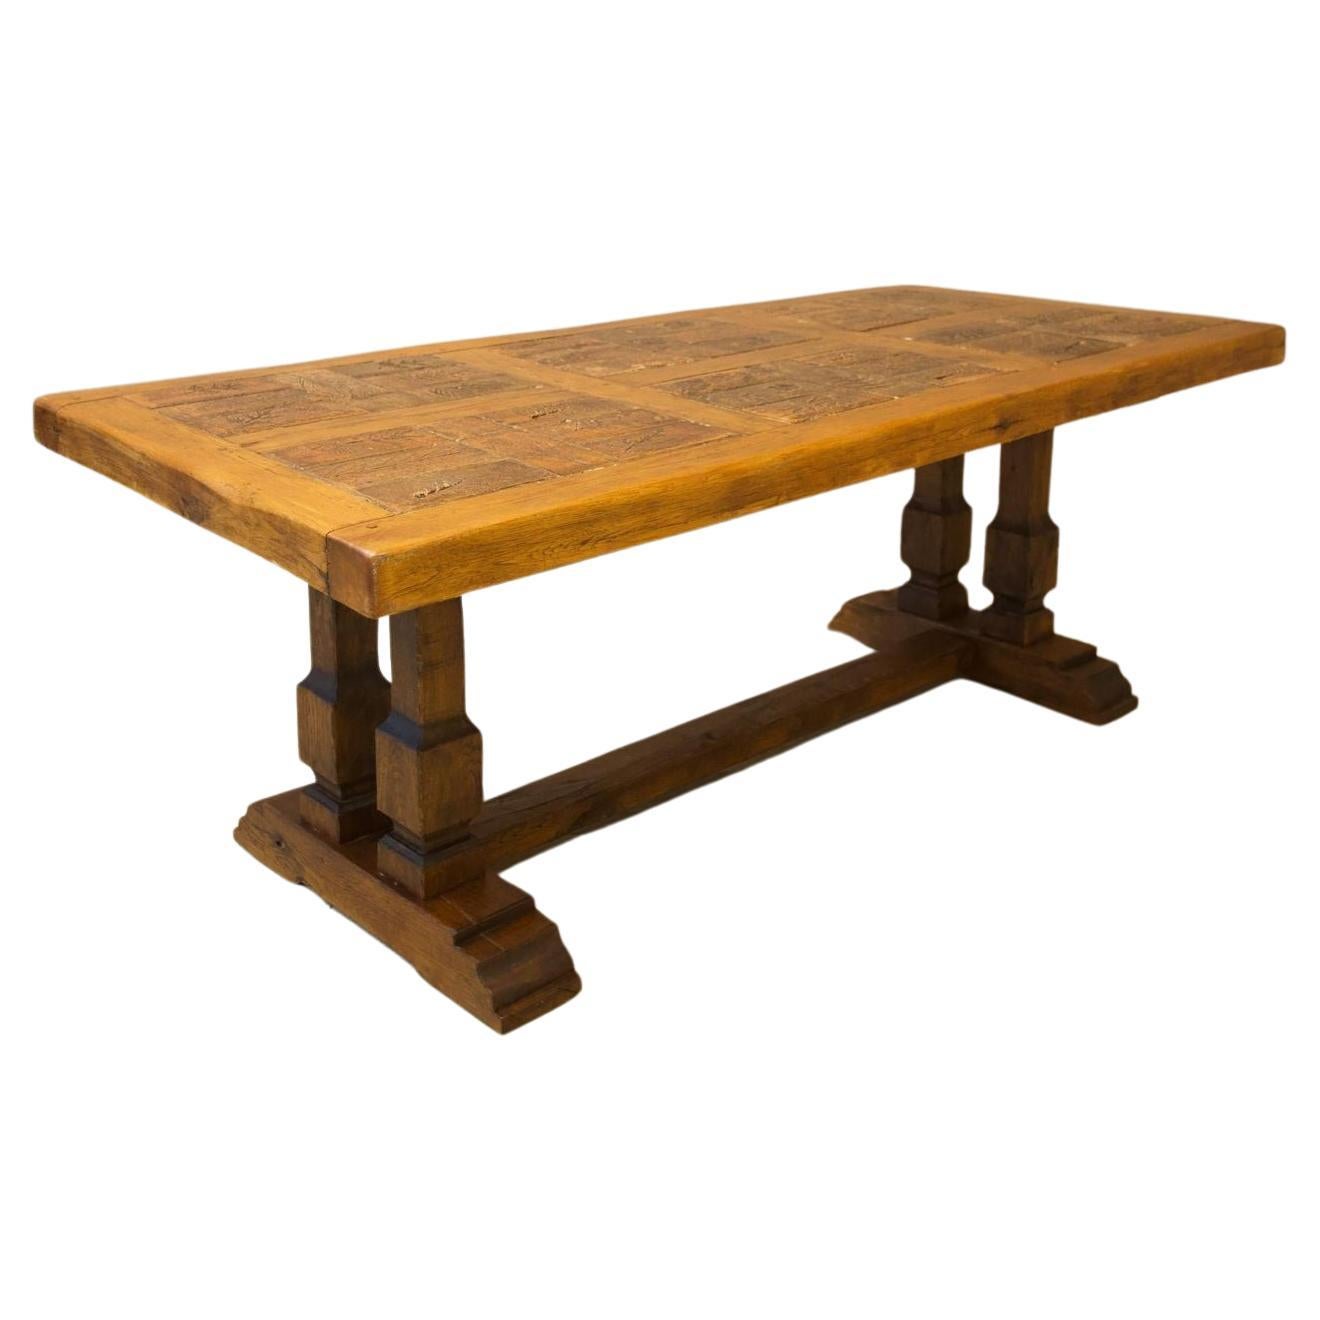 20th Century Brutalist Oak and Tile Dining Table